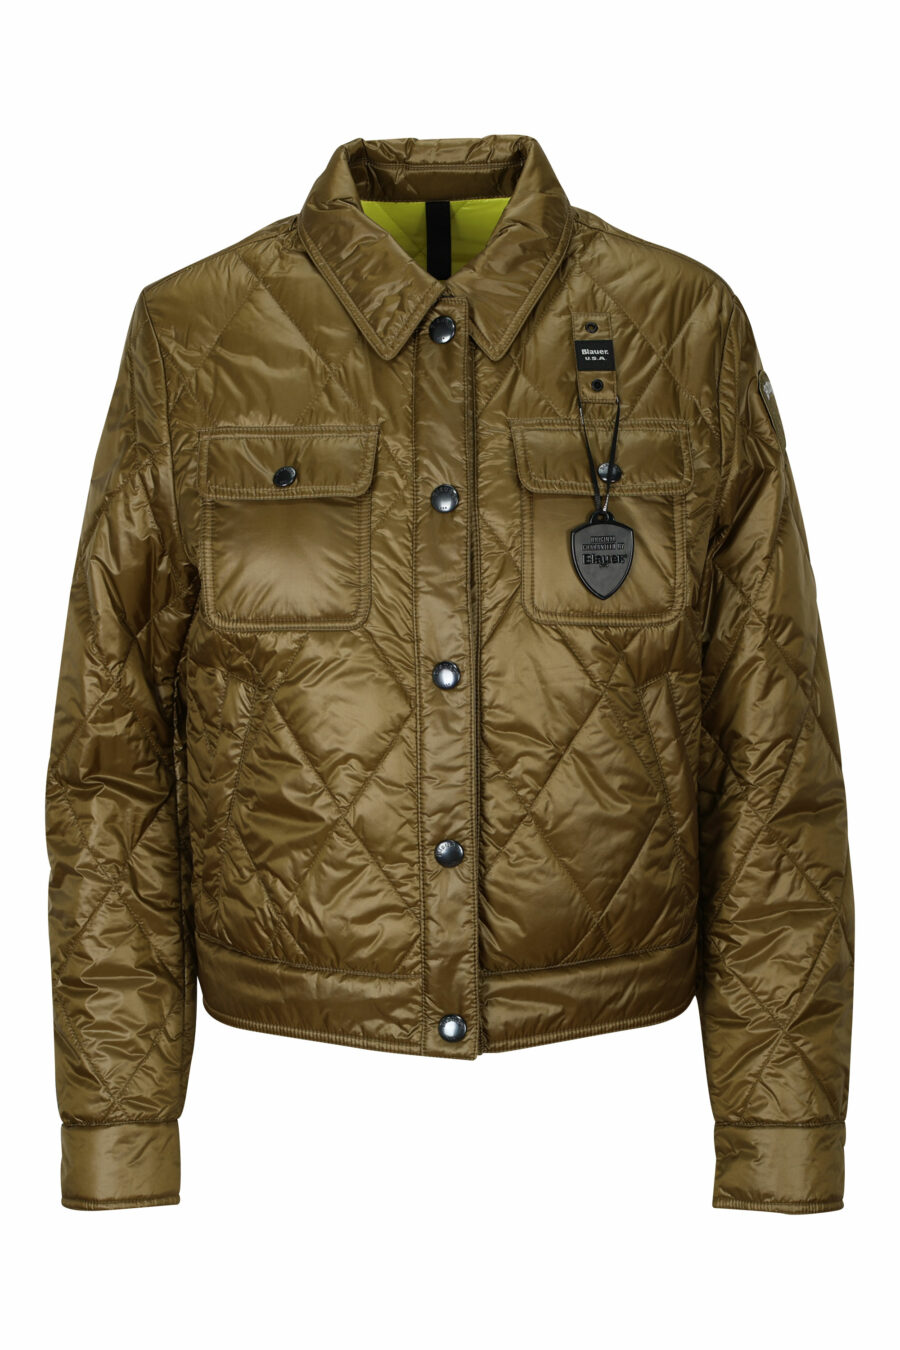 Green jacket with wavy lines and logo side patch - 8058610709860